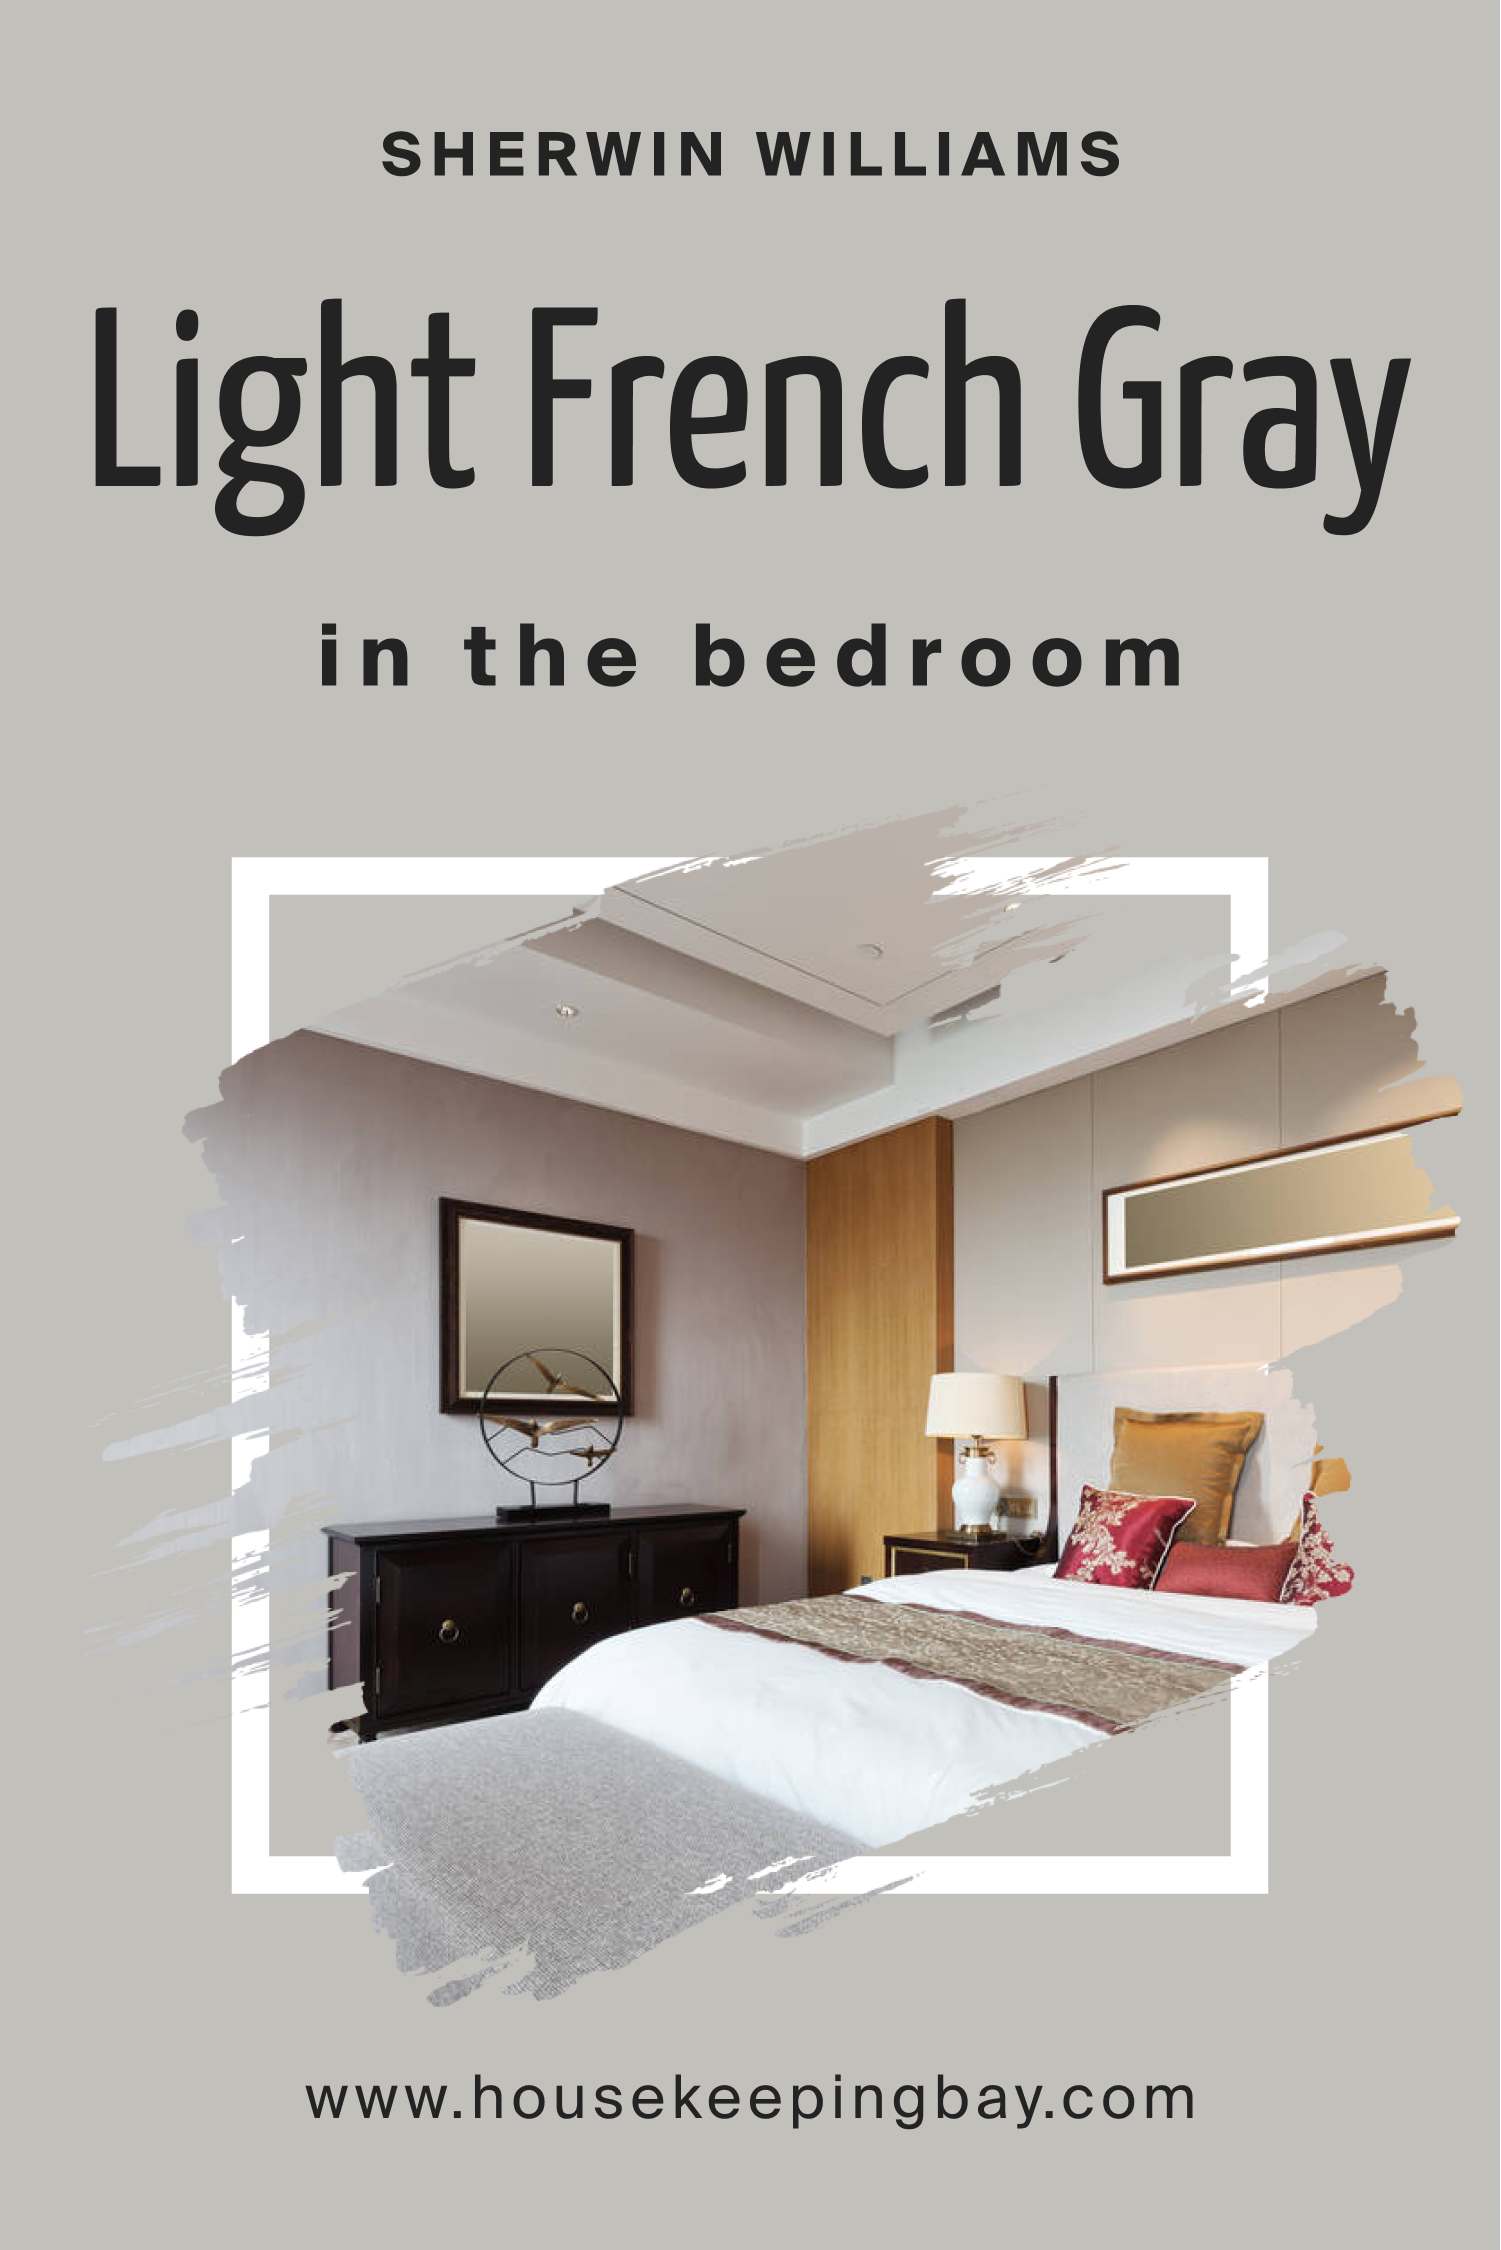 Sherwin Williams. Light French Gray For the bedroom